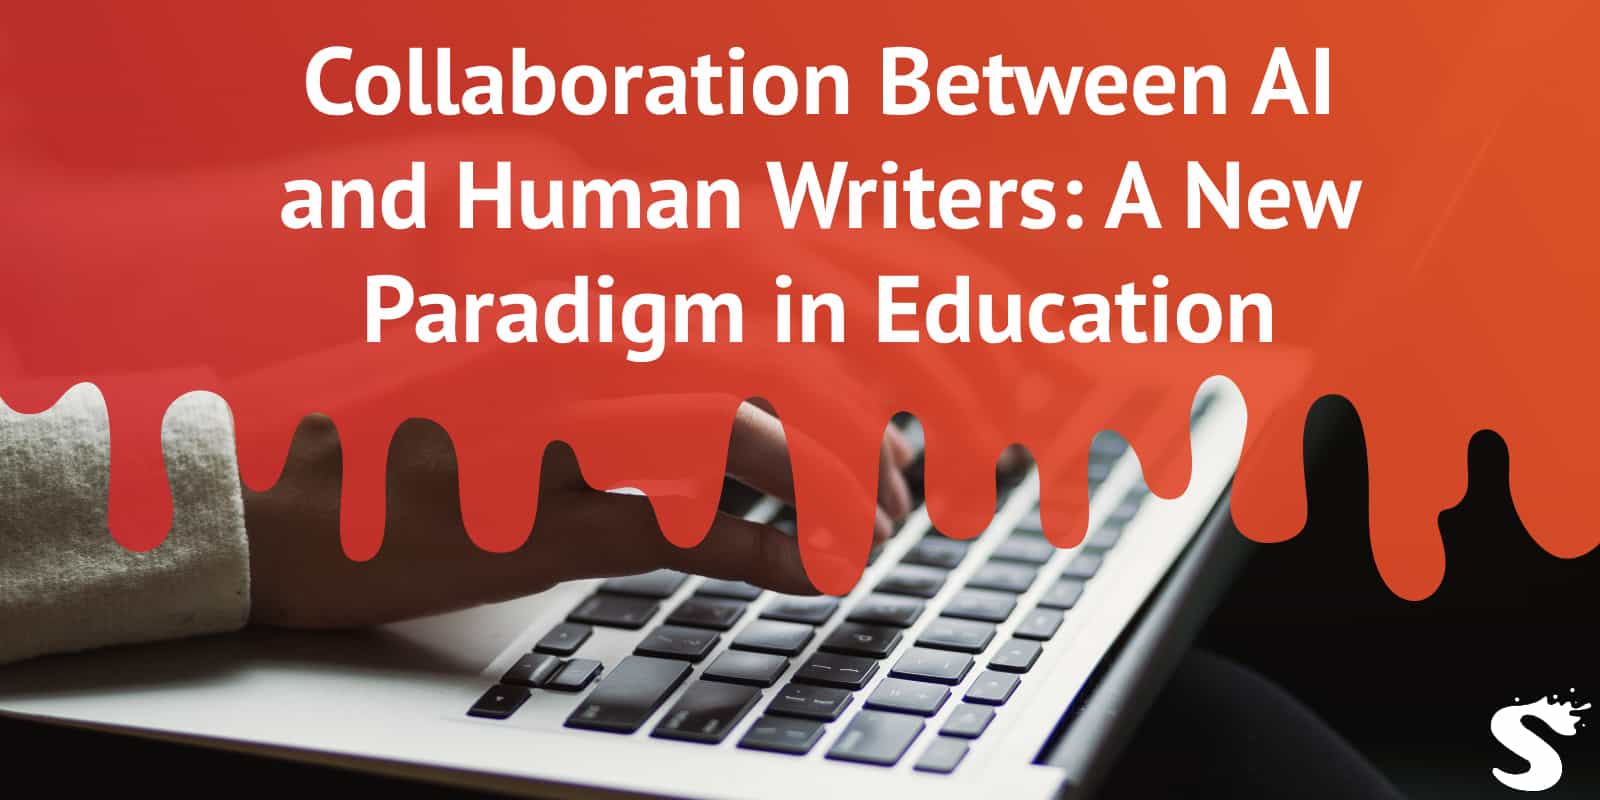 Collaboration Between AI and Human Writers: A New Paradigm in Education